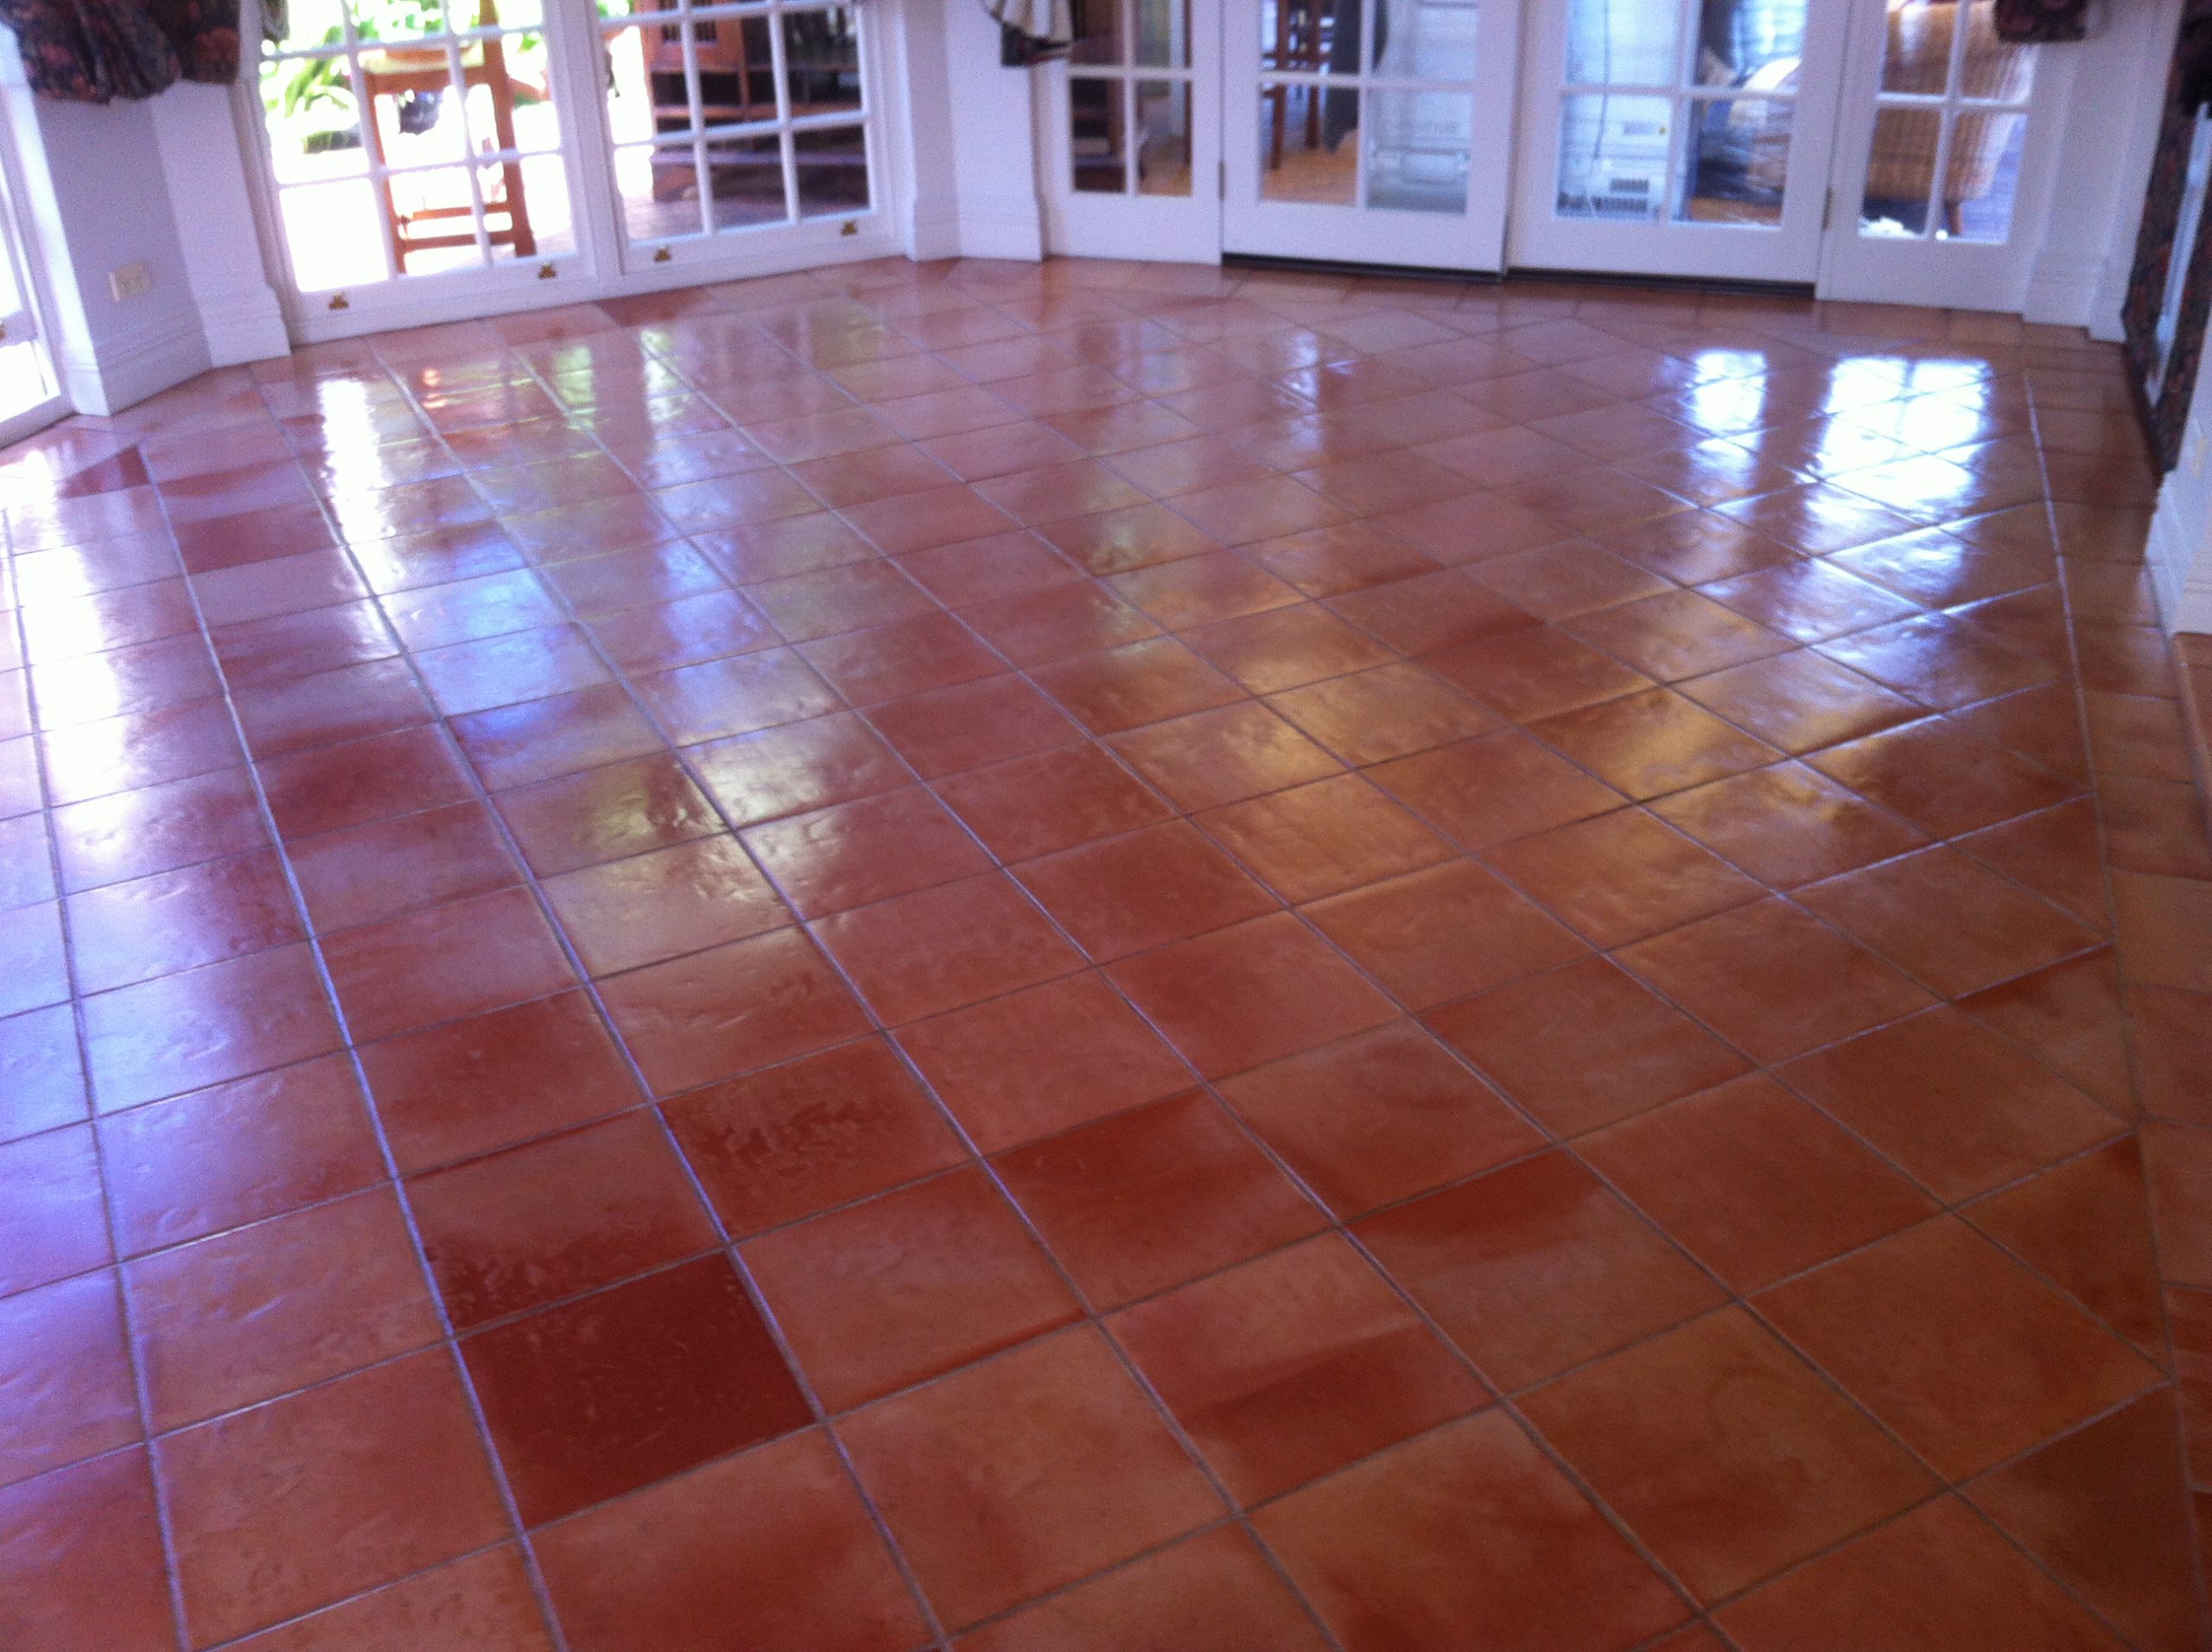 Terracotta Tiles after sealing by Priceless Carpet and grout Cleaning